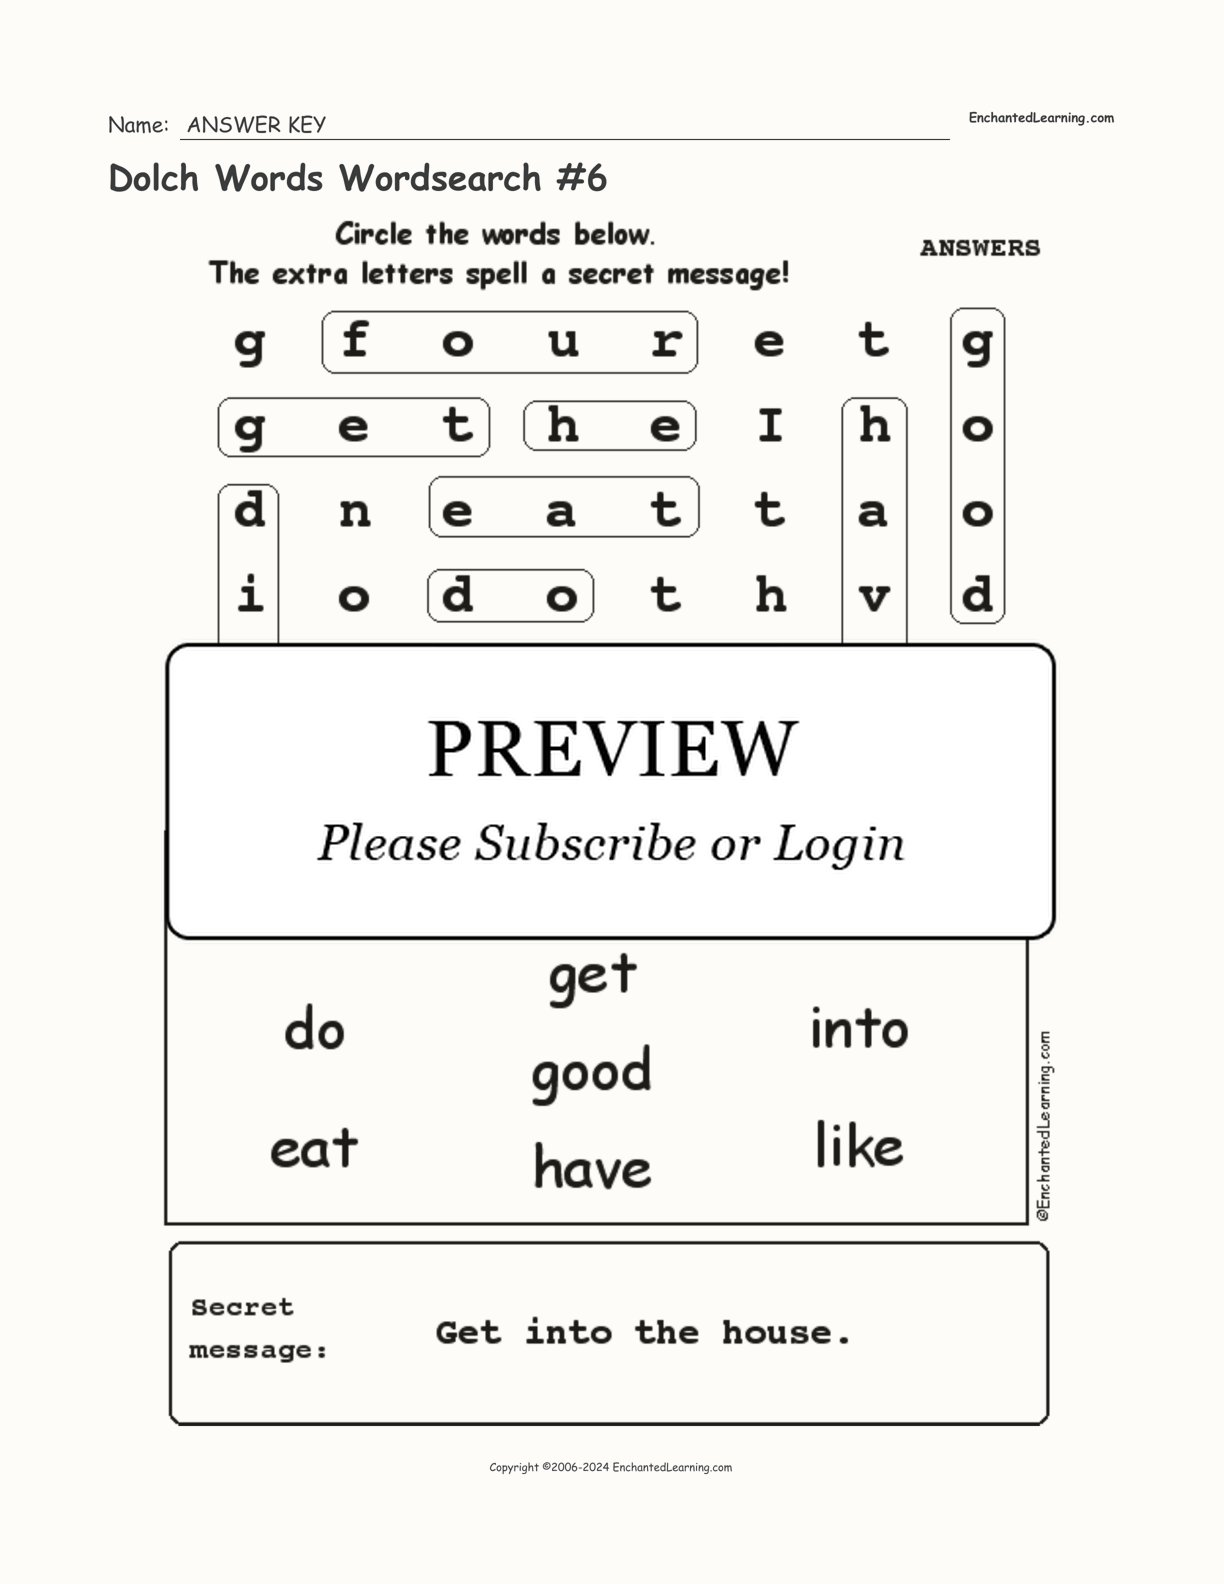 Dolch Words Wordsearch #6 interactive worksheet page 2